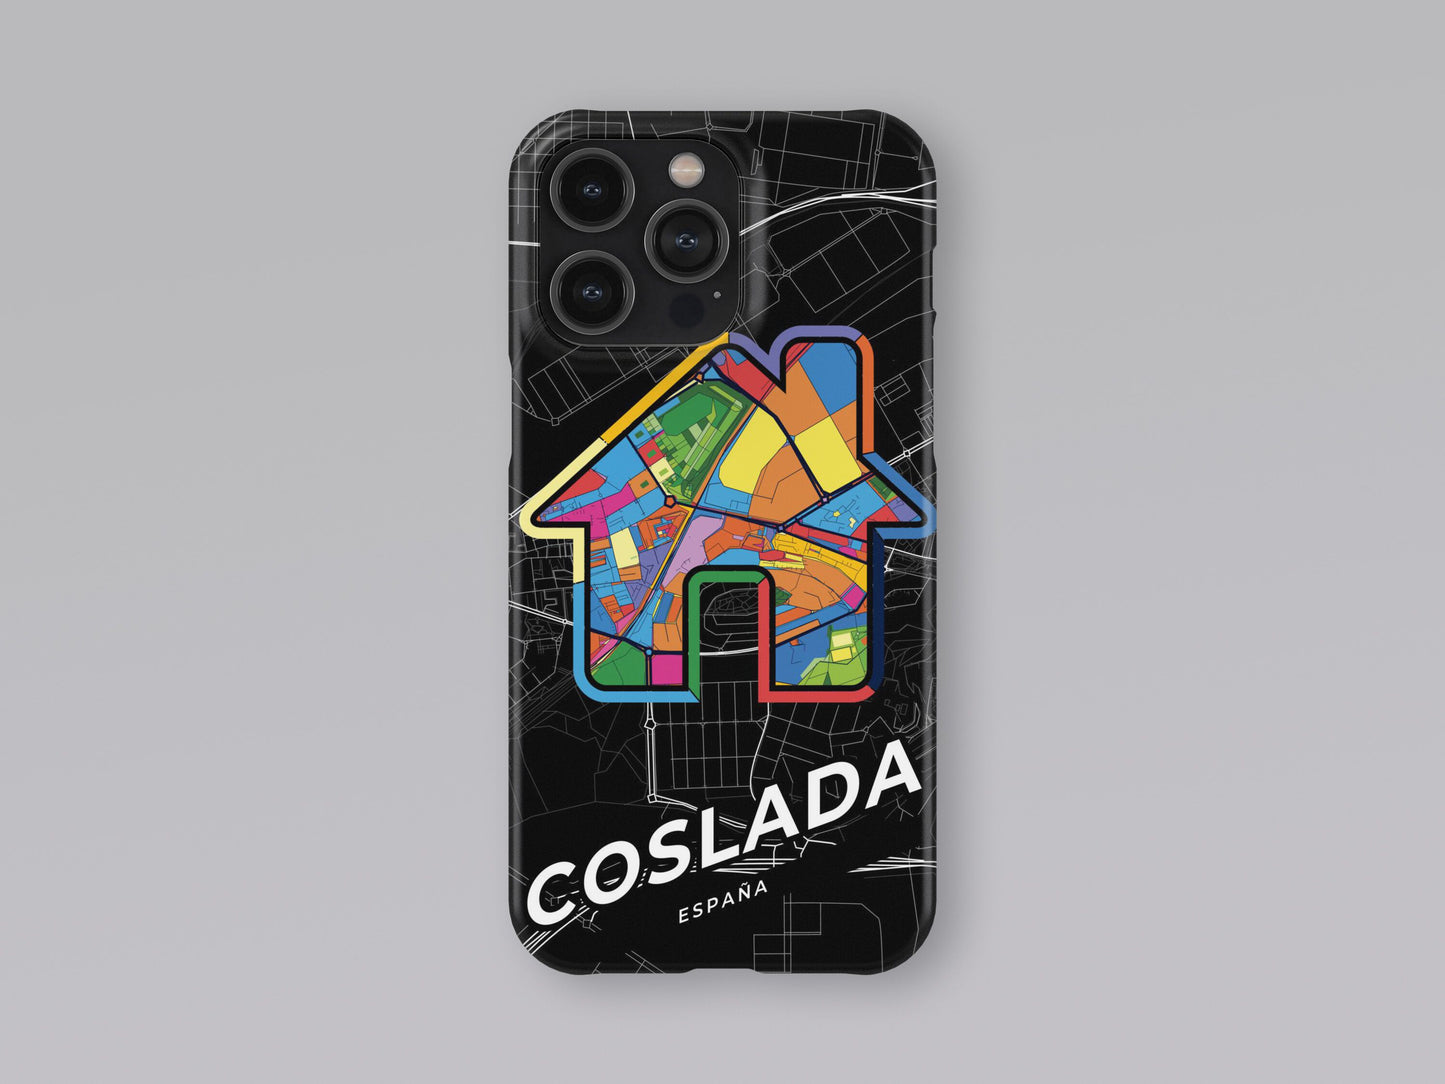 Coslada Spain slim phone case with colorful icon. Birthday, wedding or housewarming gift. Couple match cases. 3